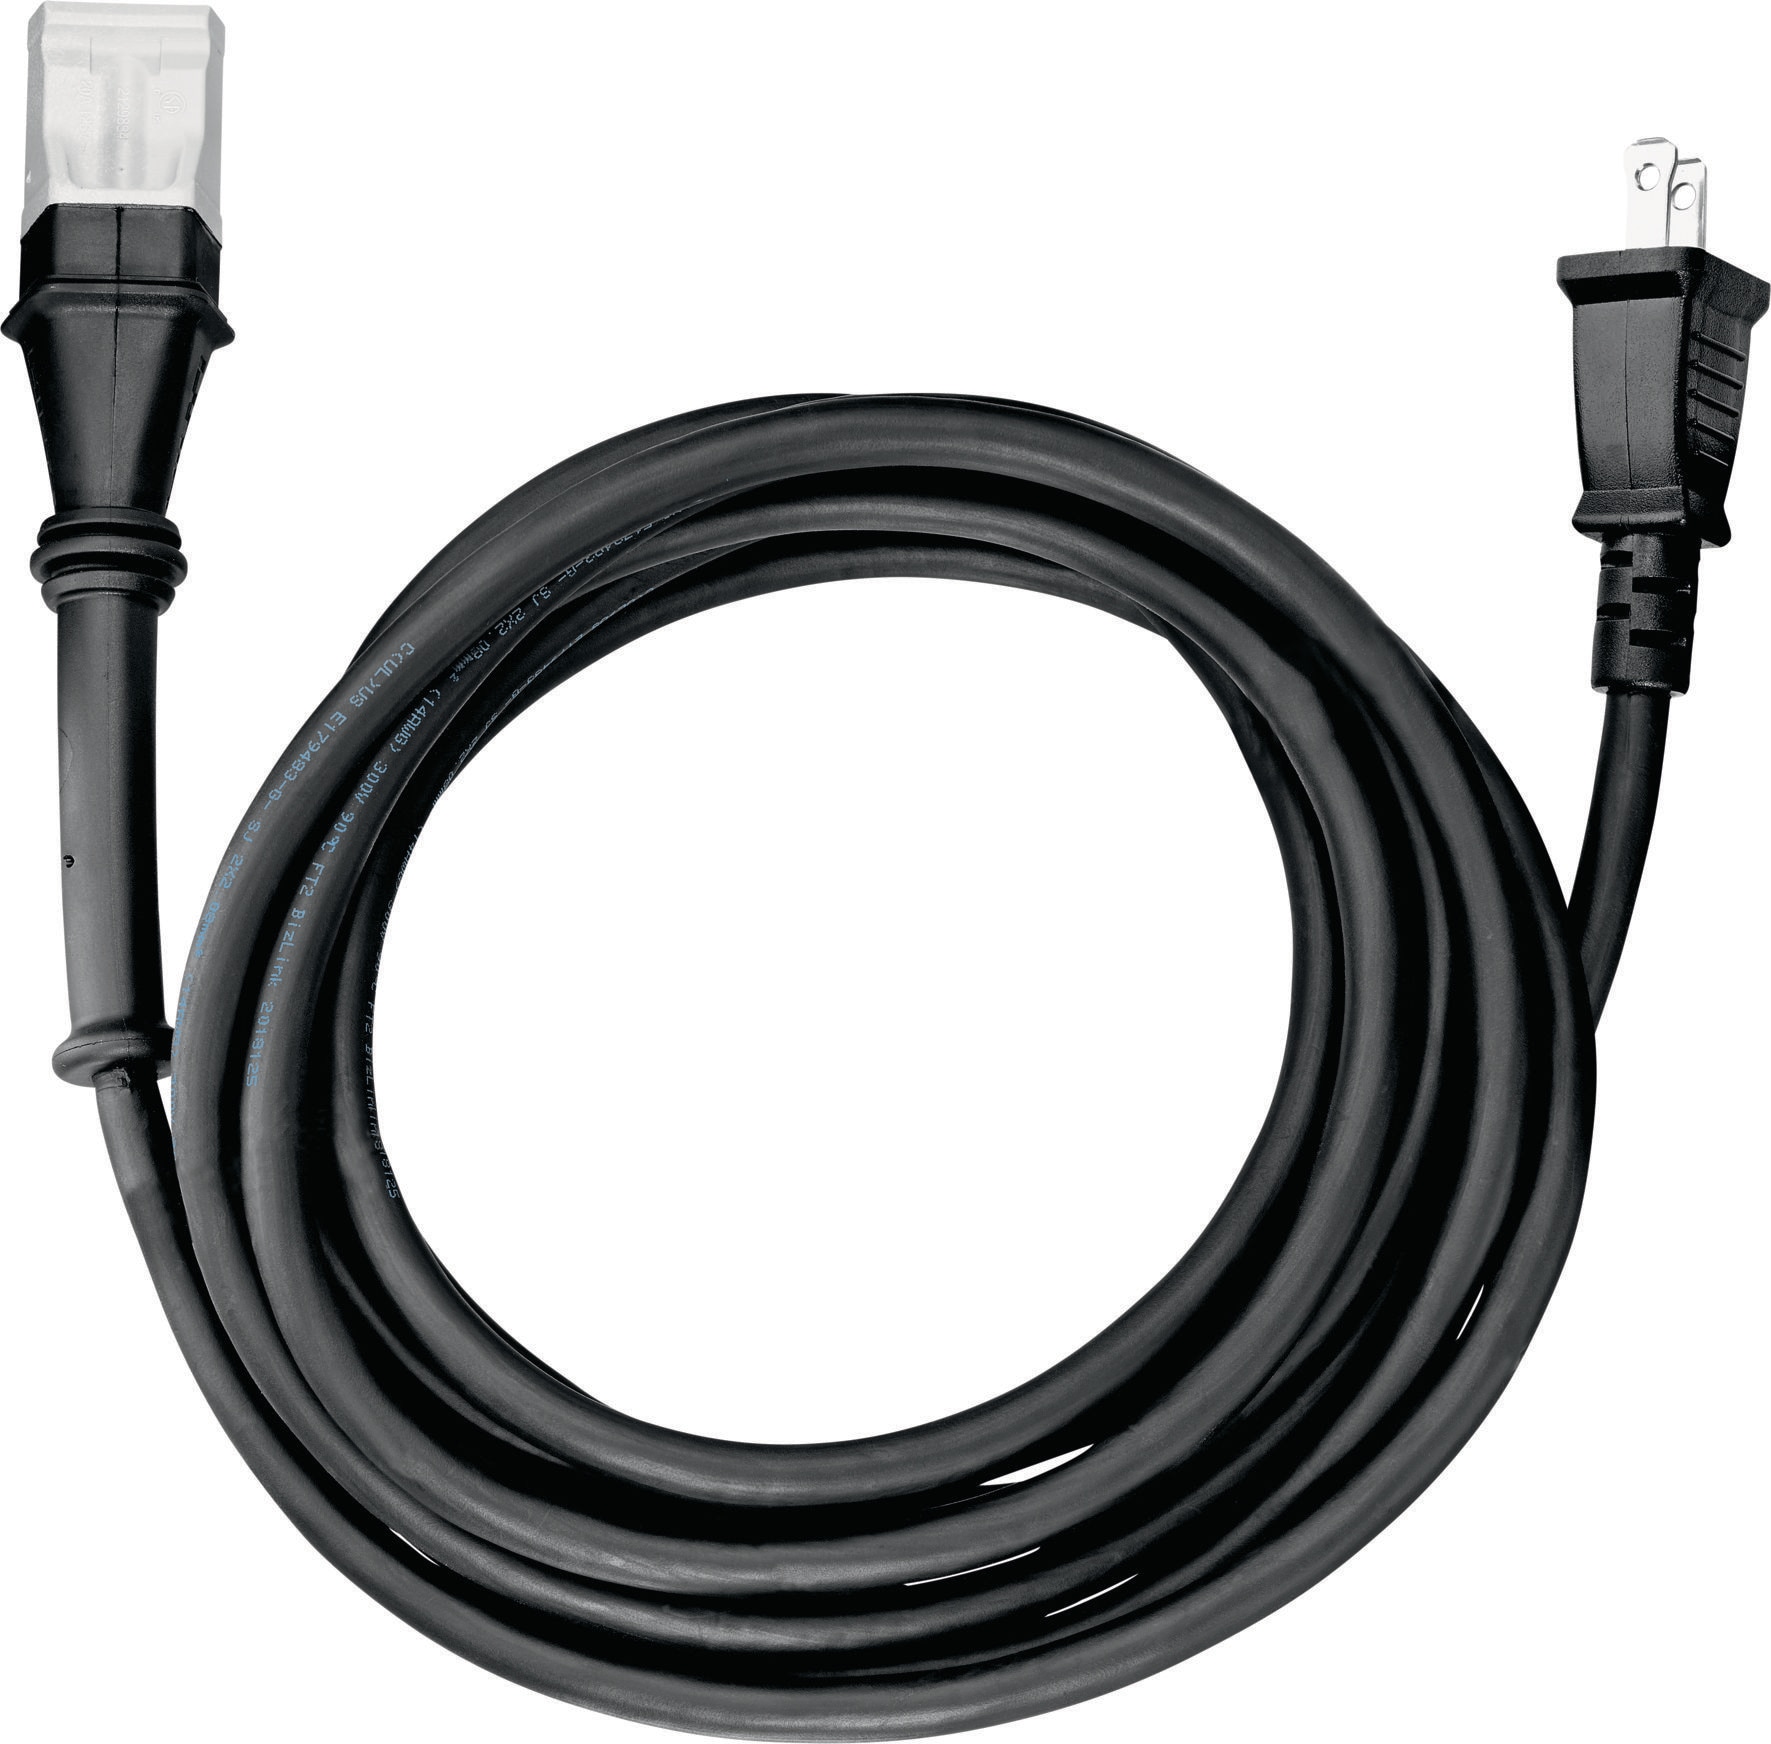 TE detachable power cord (Standard) - Accessories for rotary 